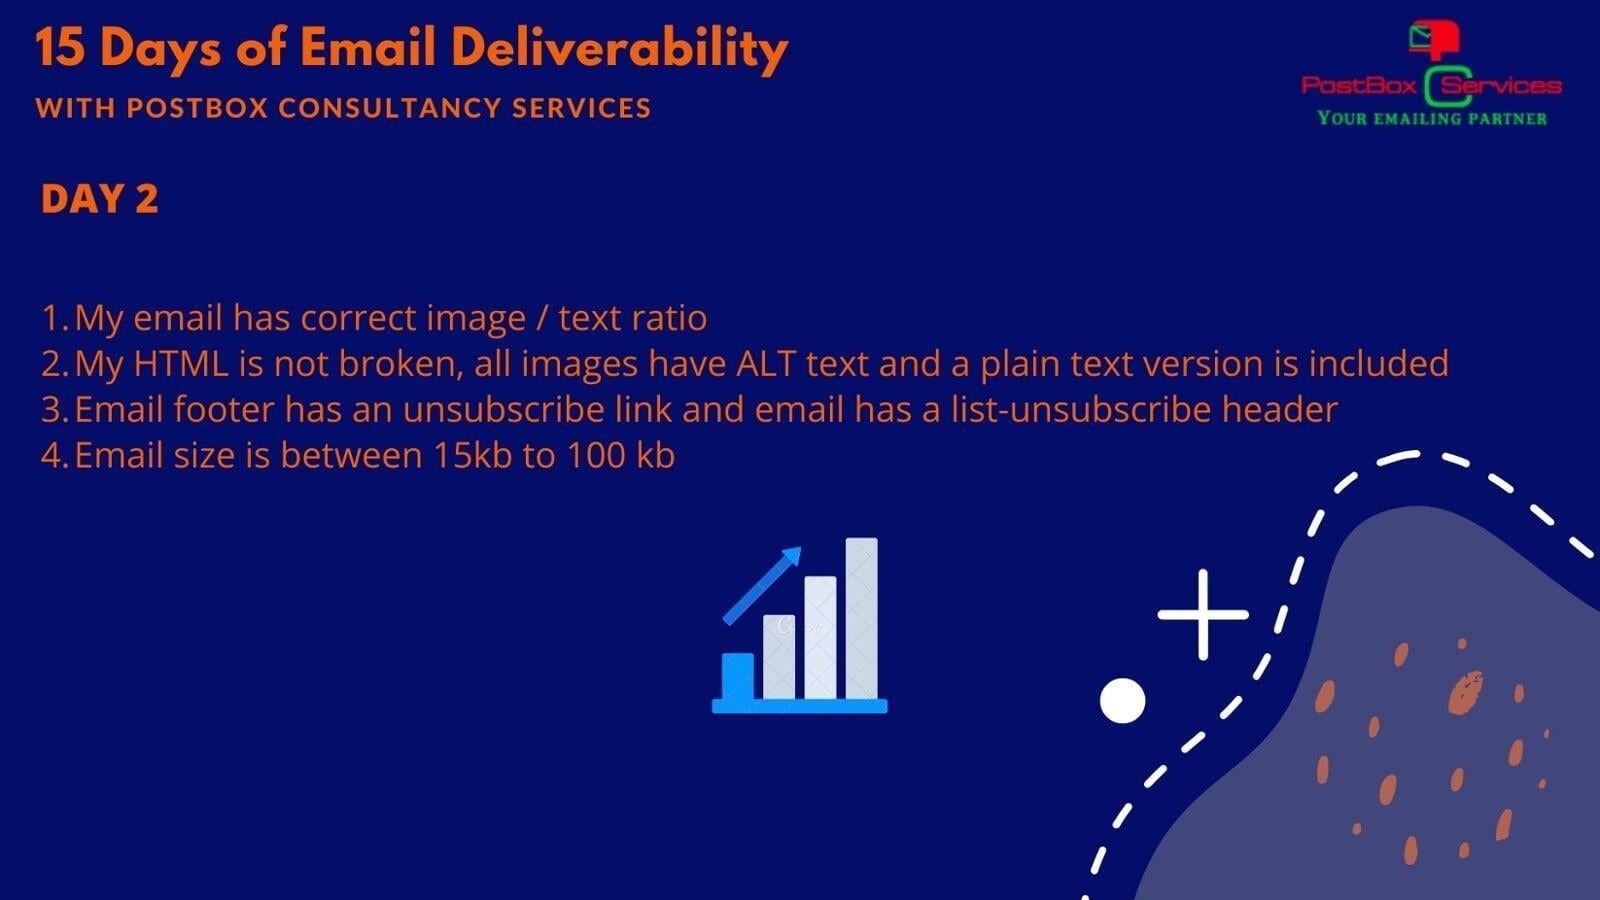 Day 2 Email Deliverability